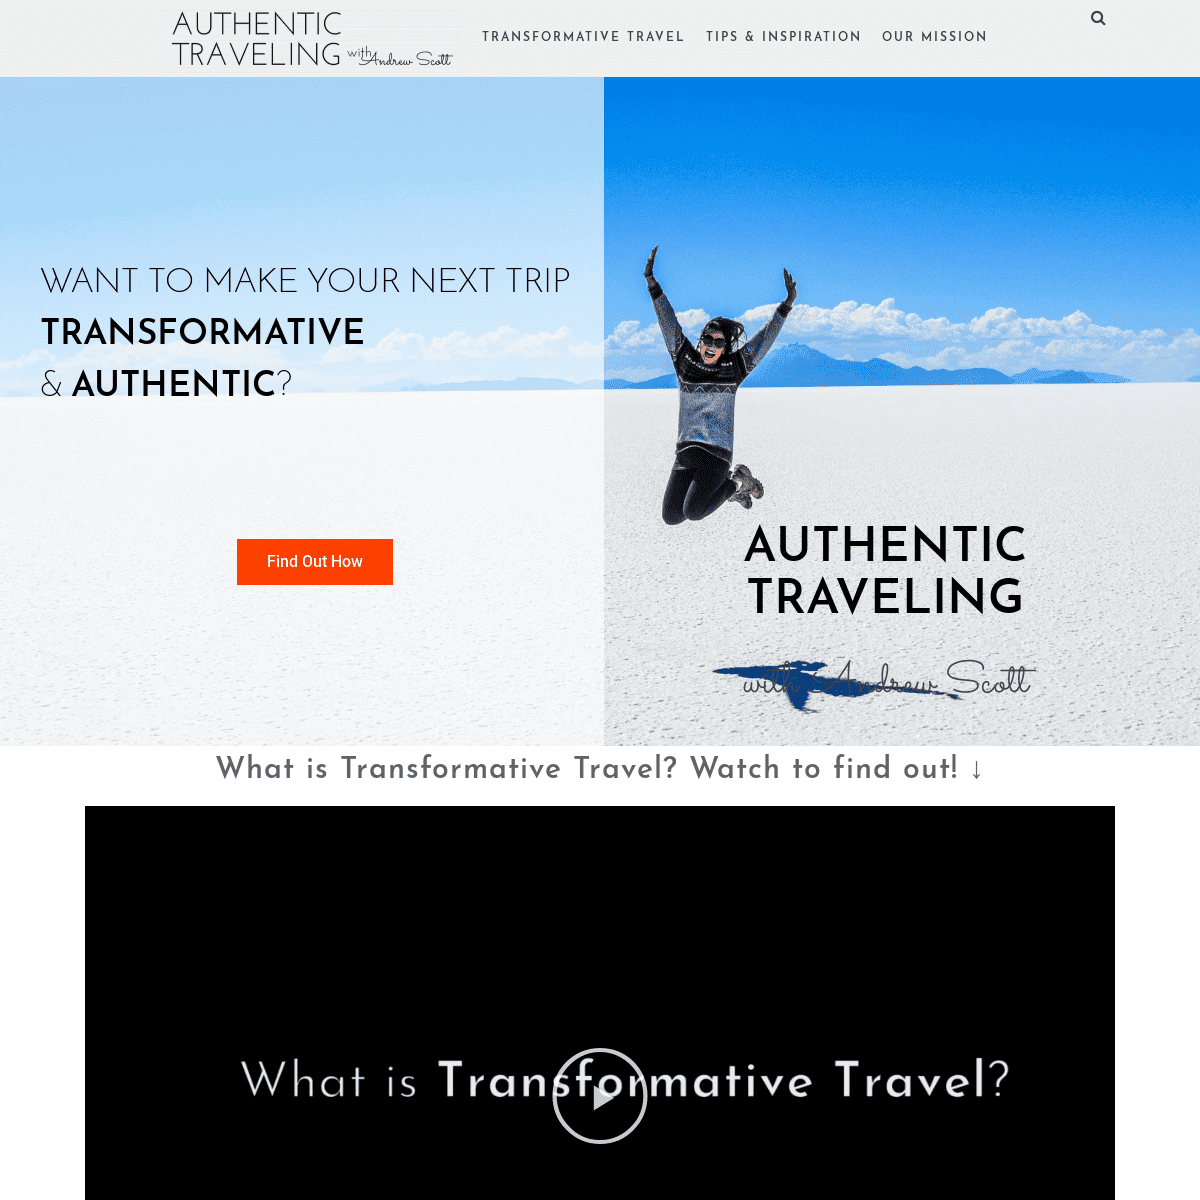 Authentic Traveling - Make Your Next Trip Transformative & Authentic - Authentic Traveling